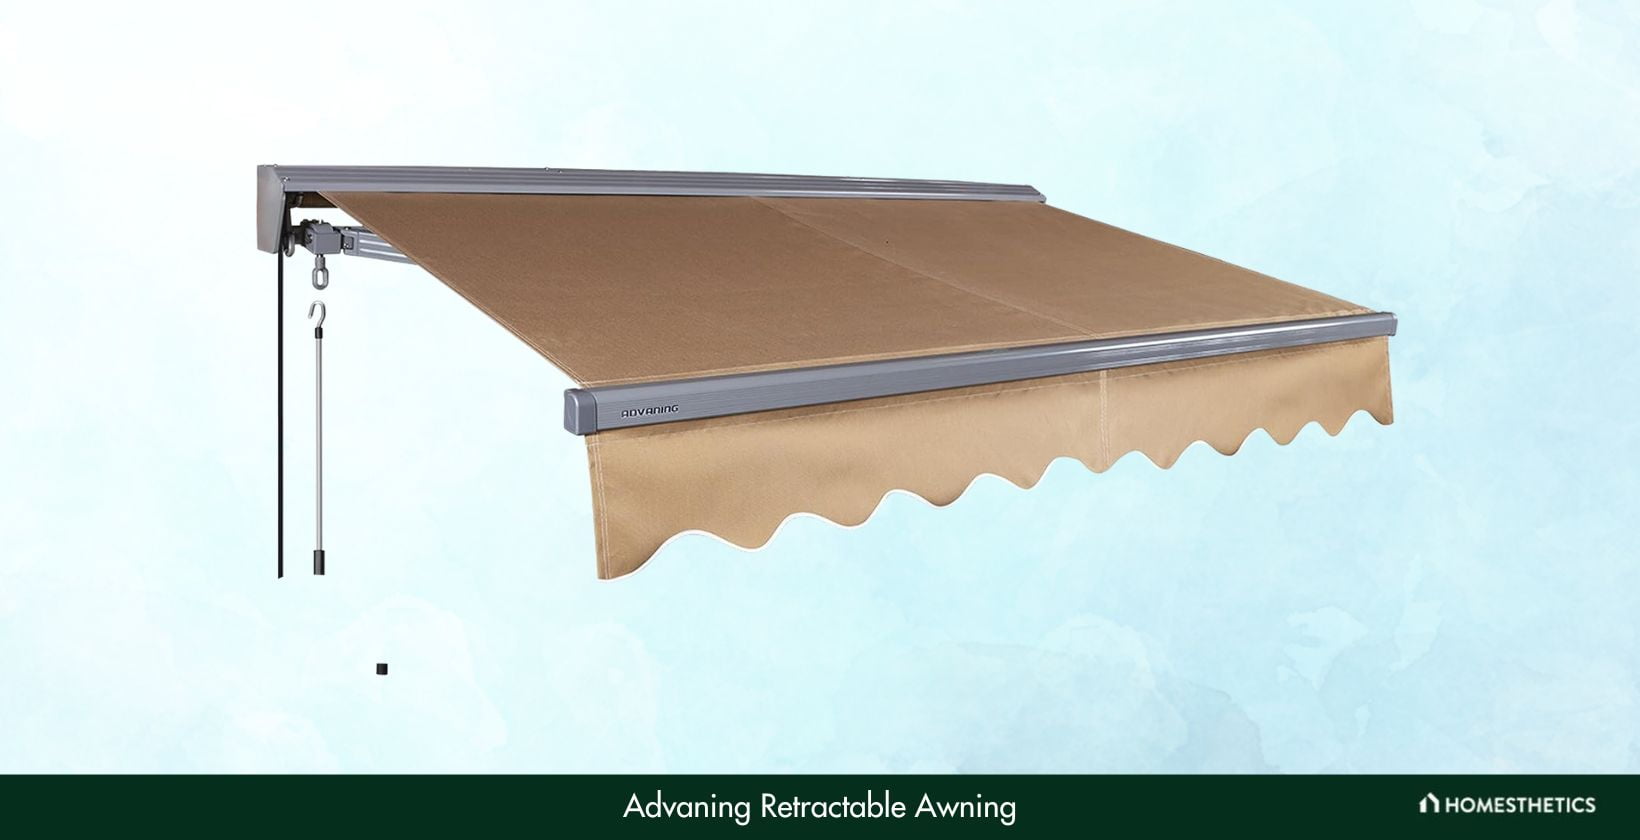 Advaning Retractable Awning107